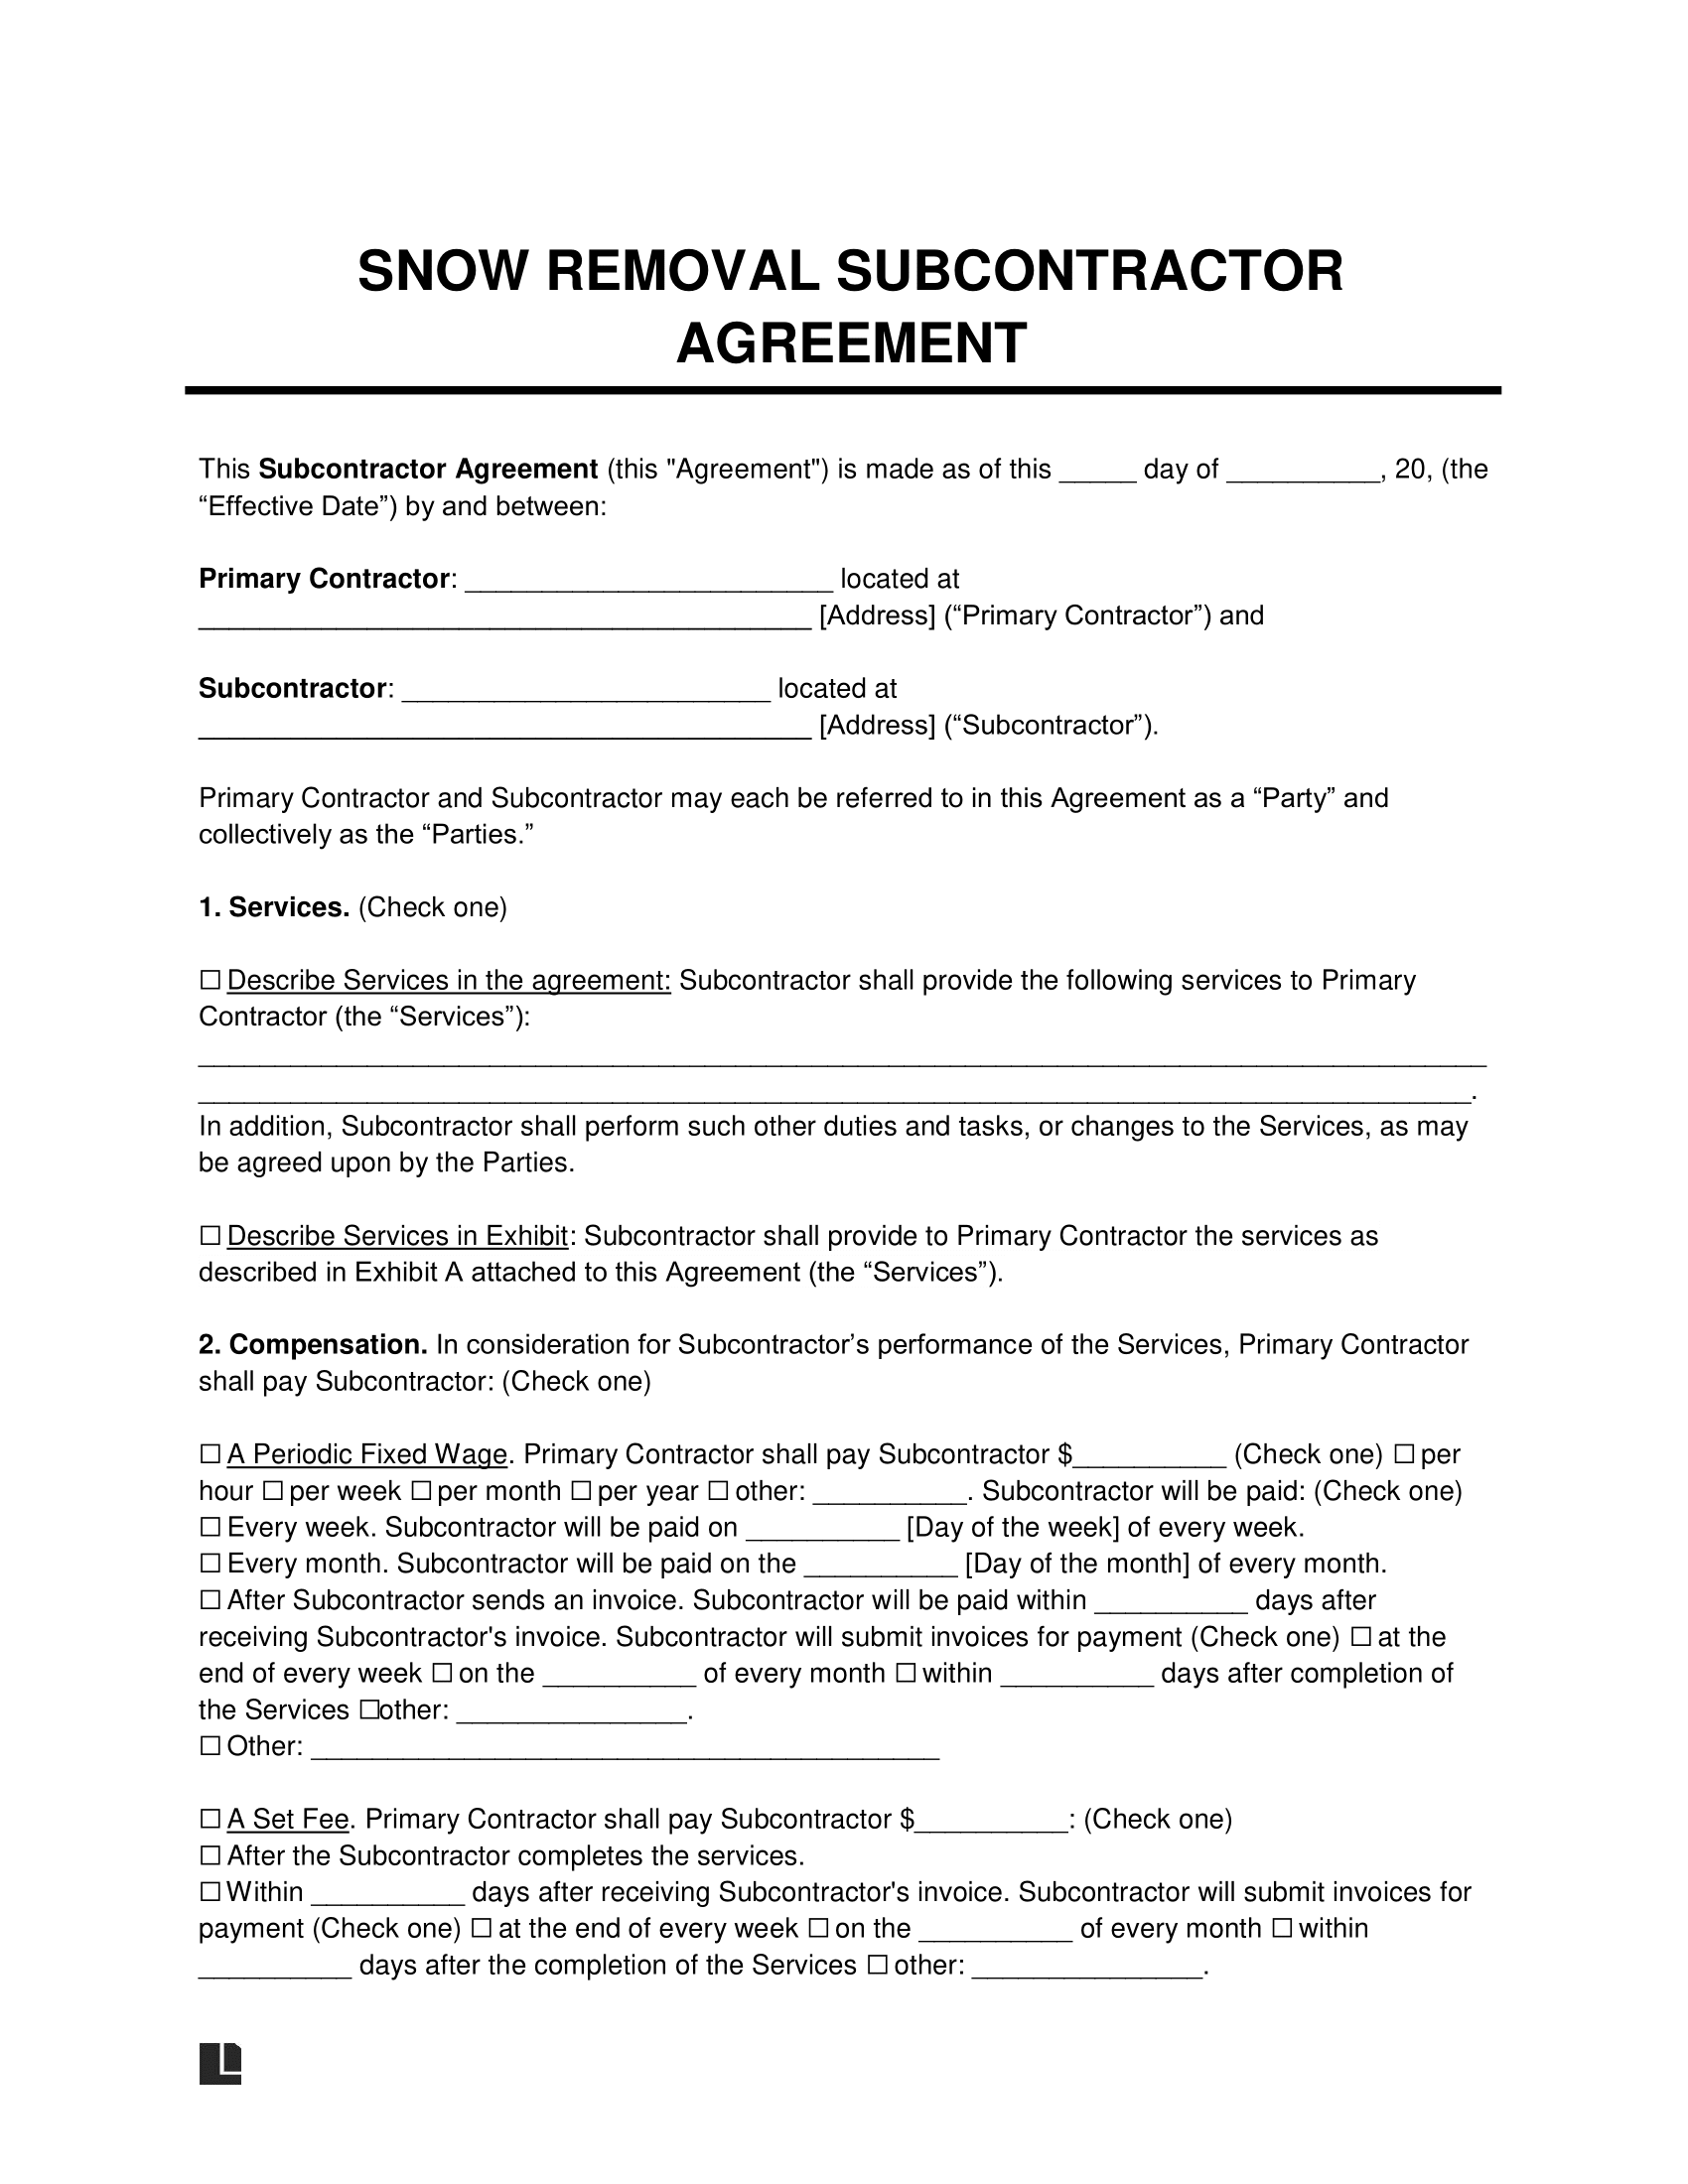 Snow Removal Subcontractor Agreement